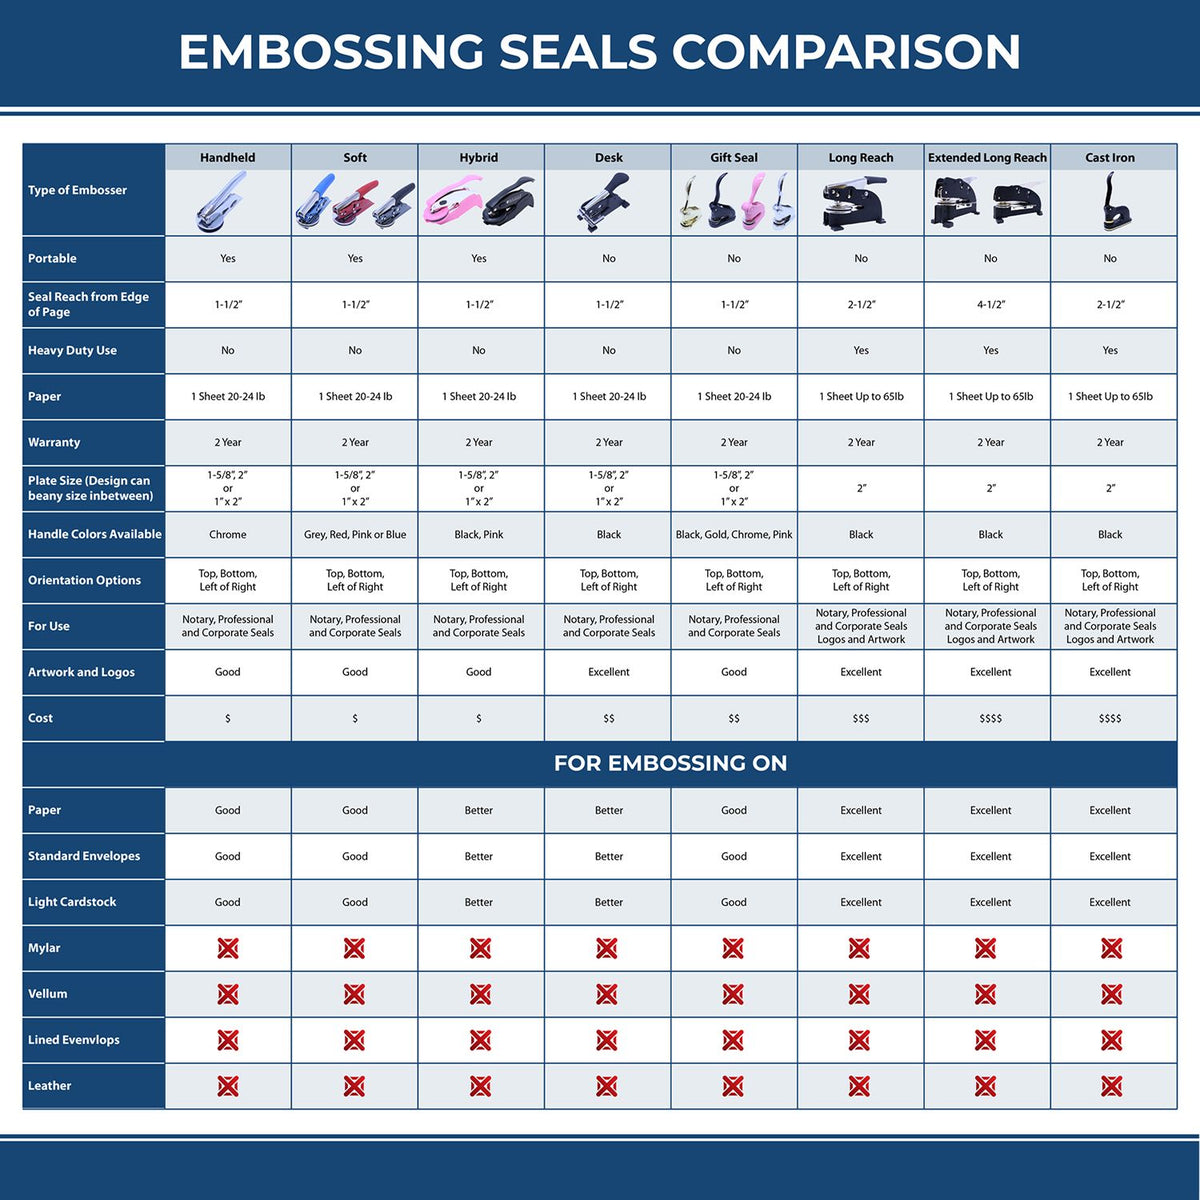 A comparison chart for the different types of mount models available for the Hybrid Florida Engineer Seal